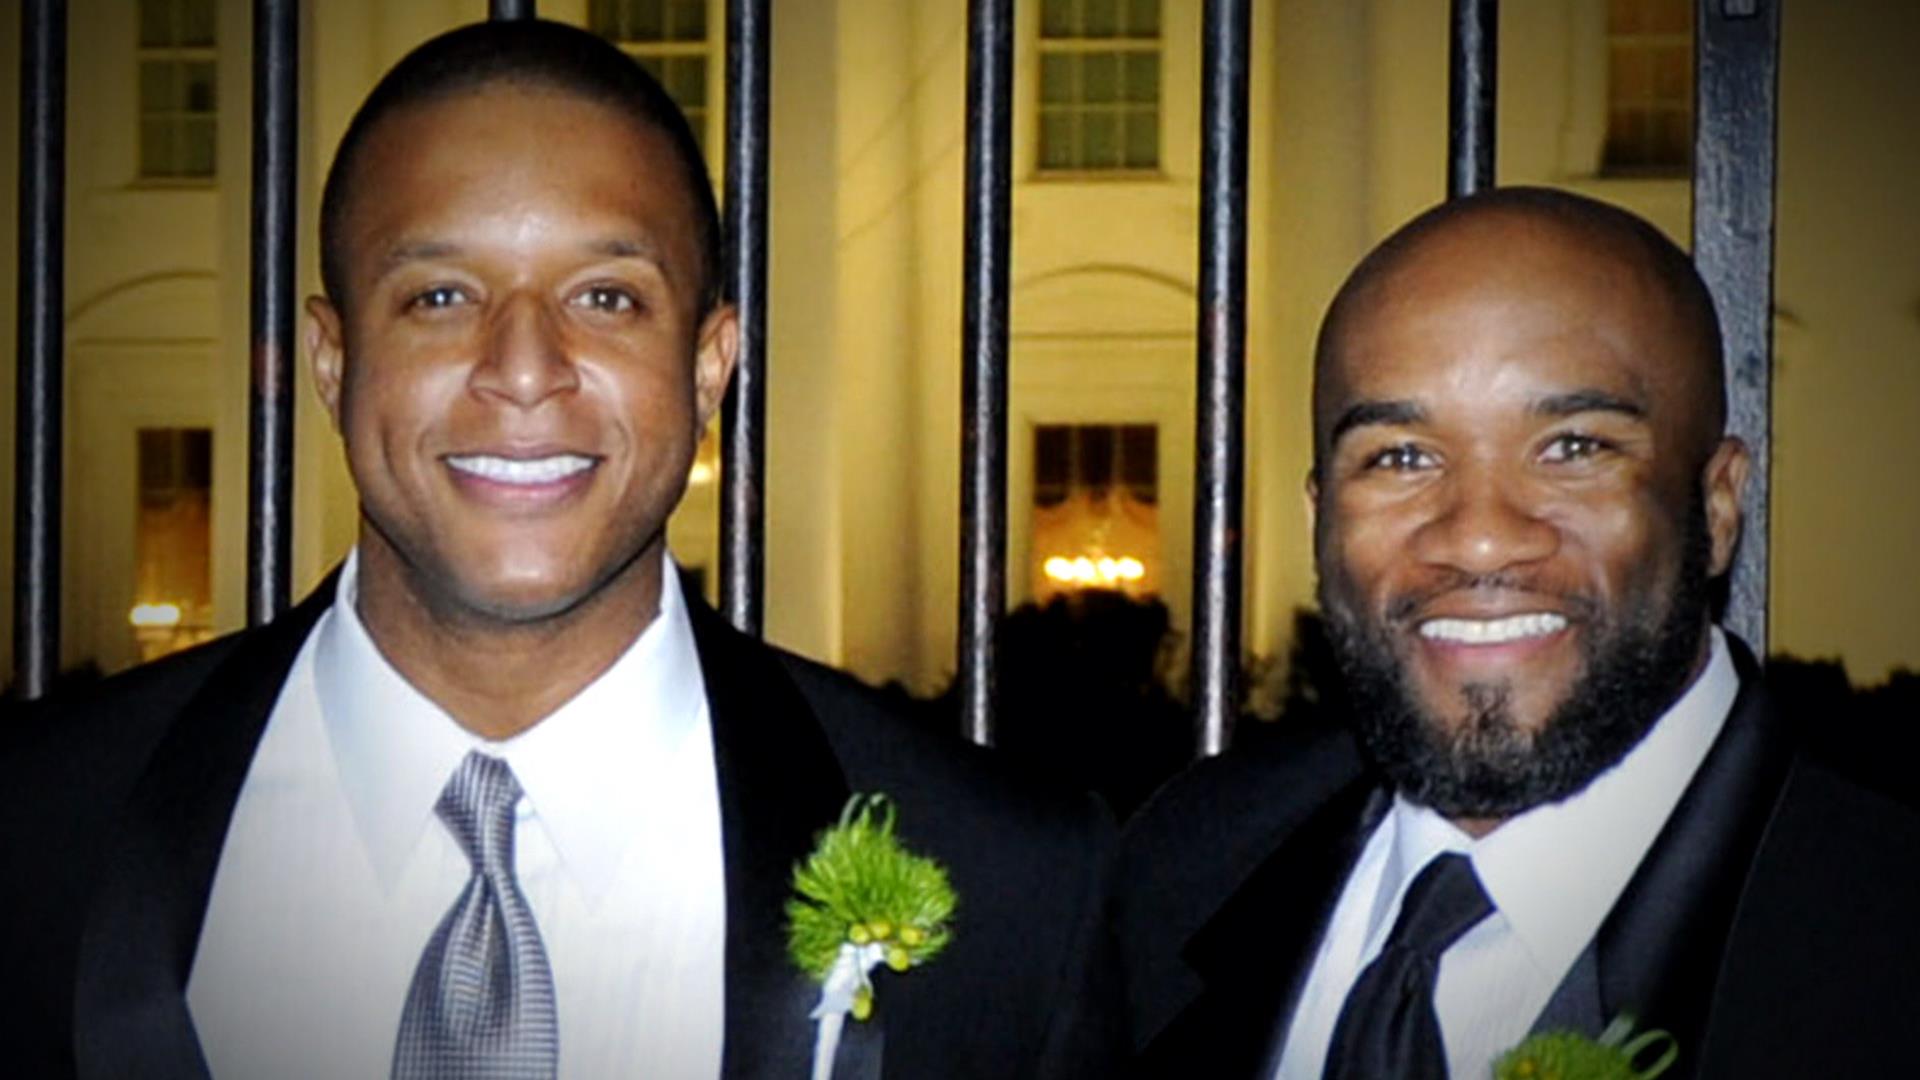 War on Cancer: Craig Melvin shares his brother's colon cancer battle